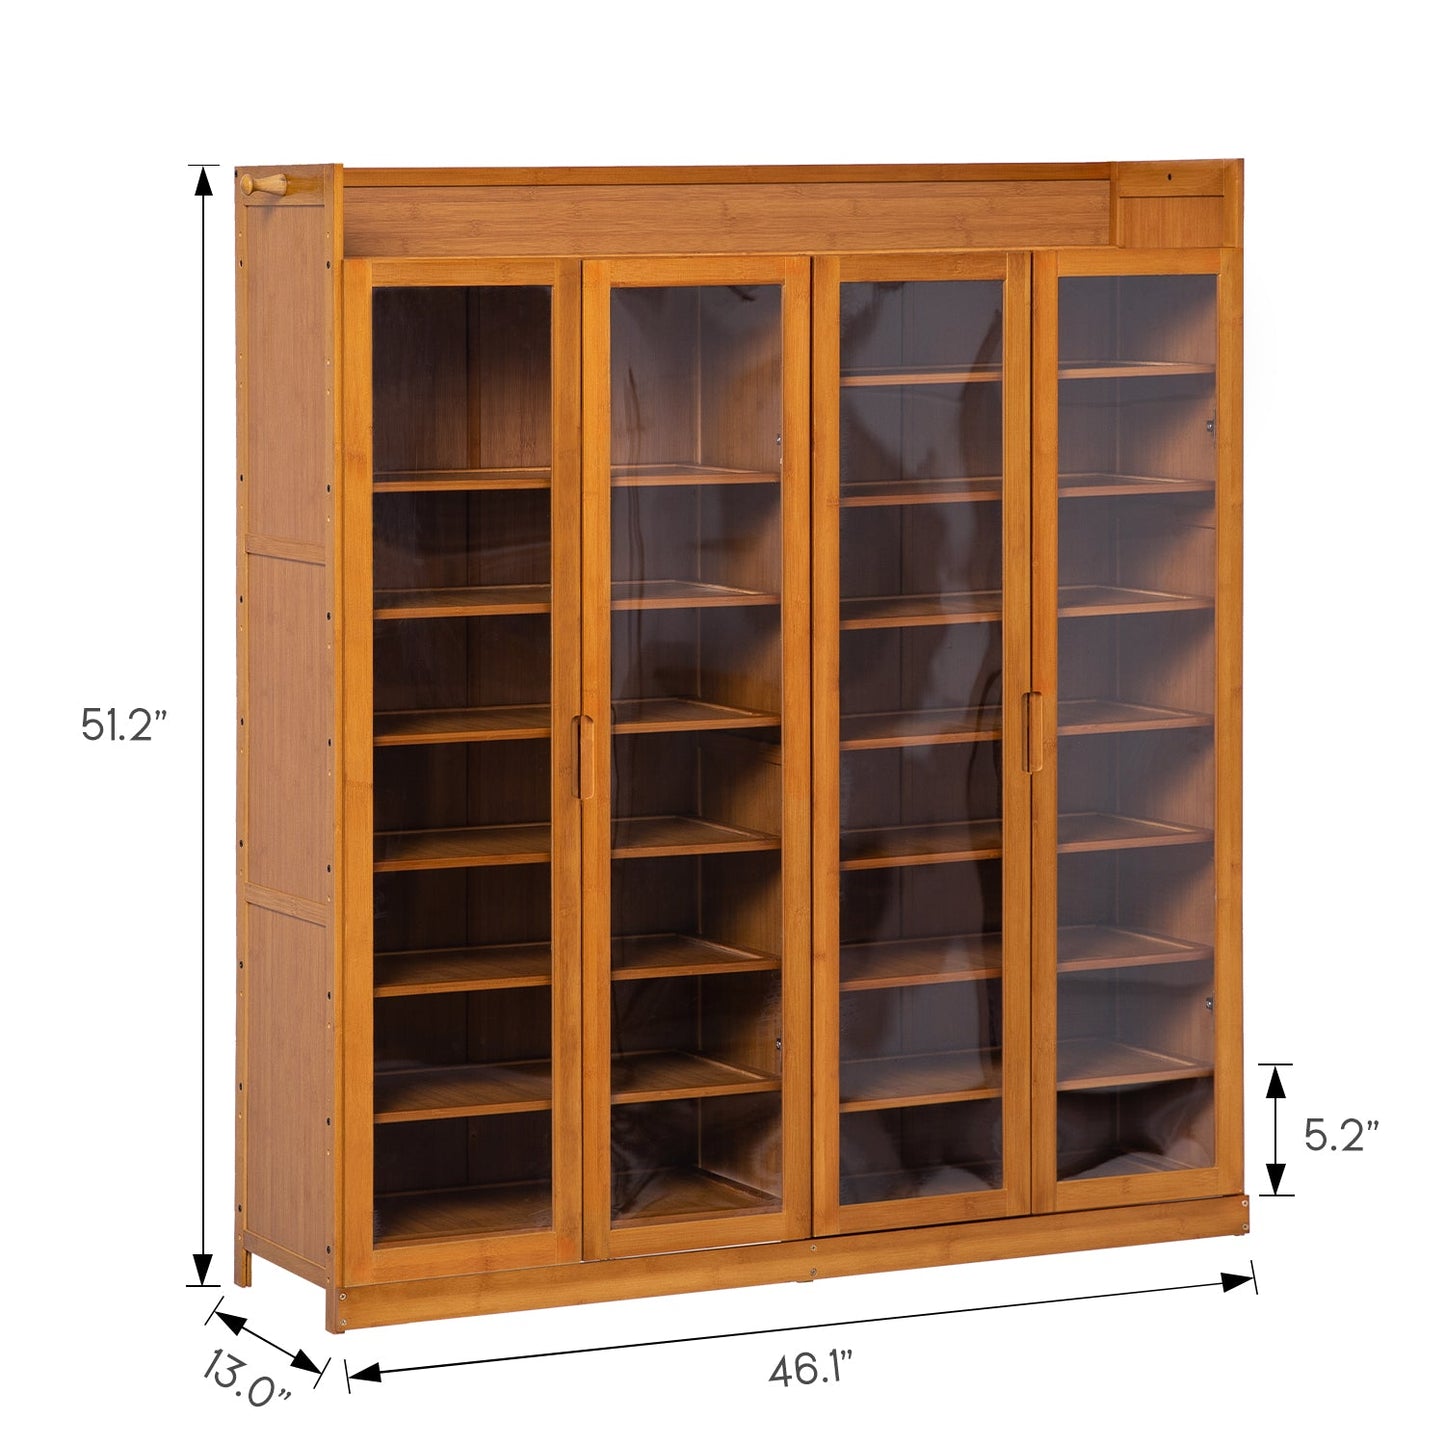 Visible Four-Doors Roofless Shoe Organizer w/Boots Compartments - Bamboo/Acrylic - Brown